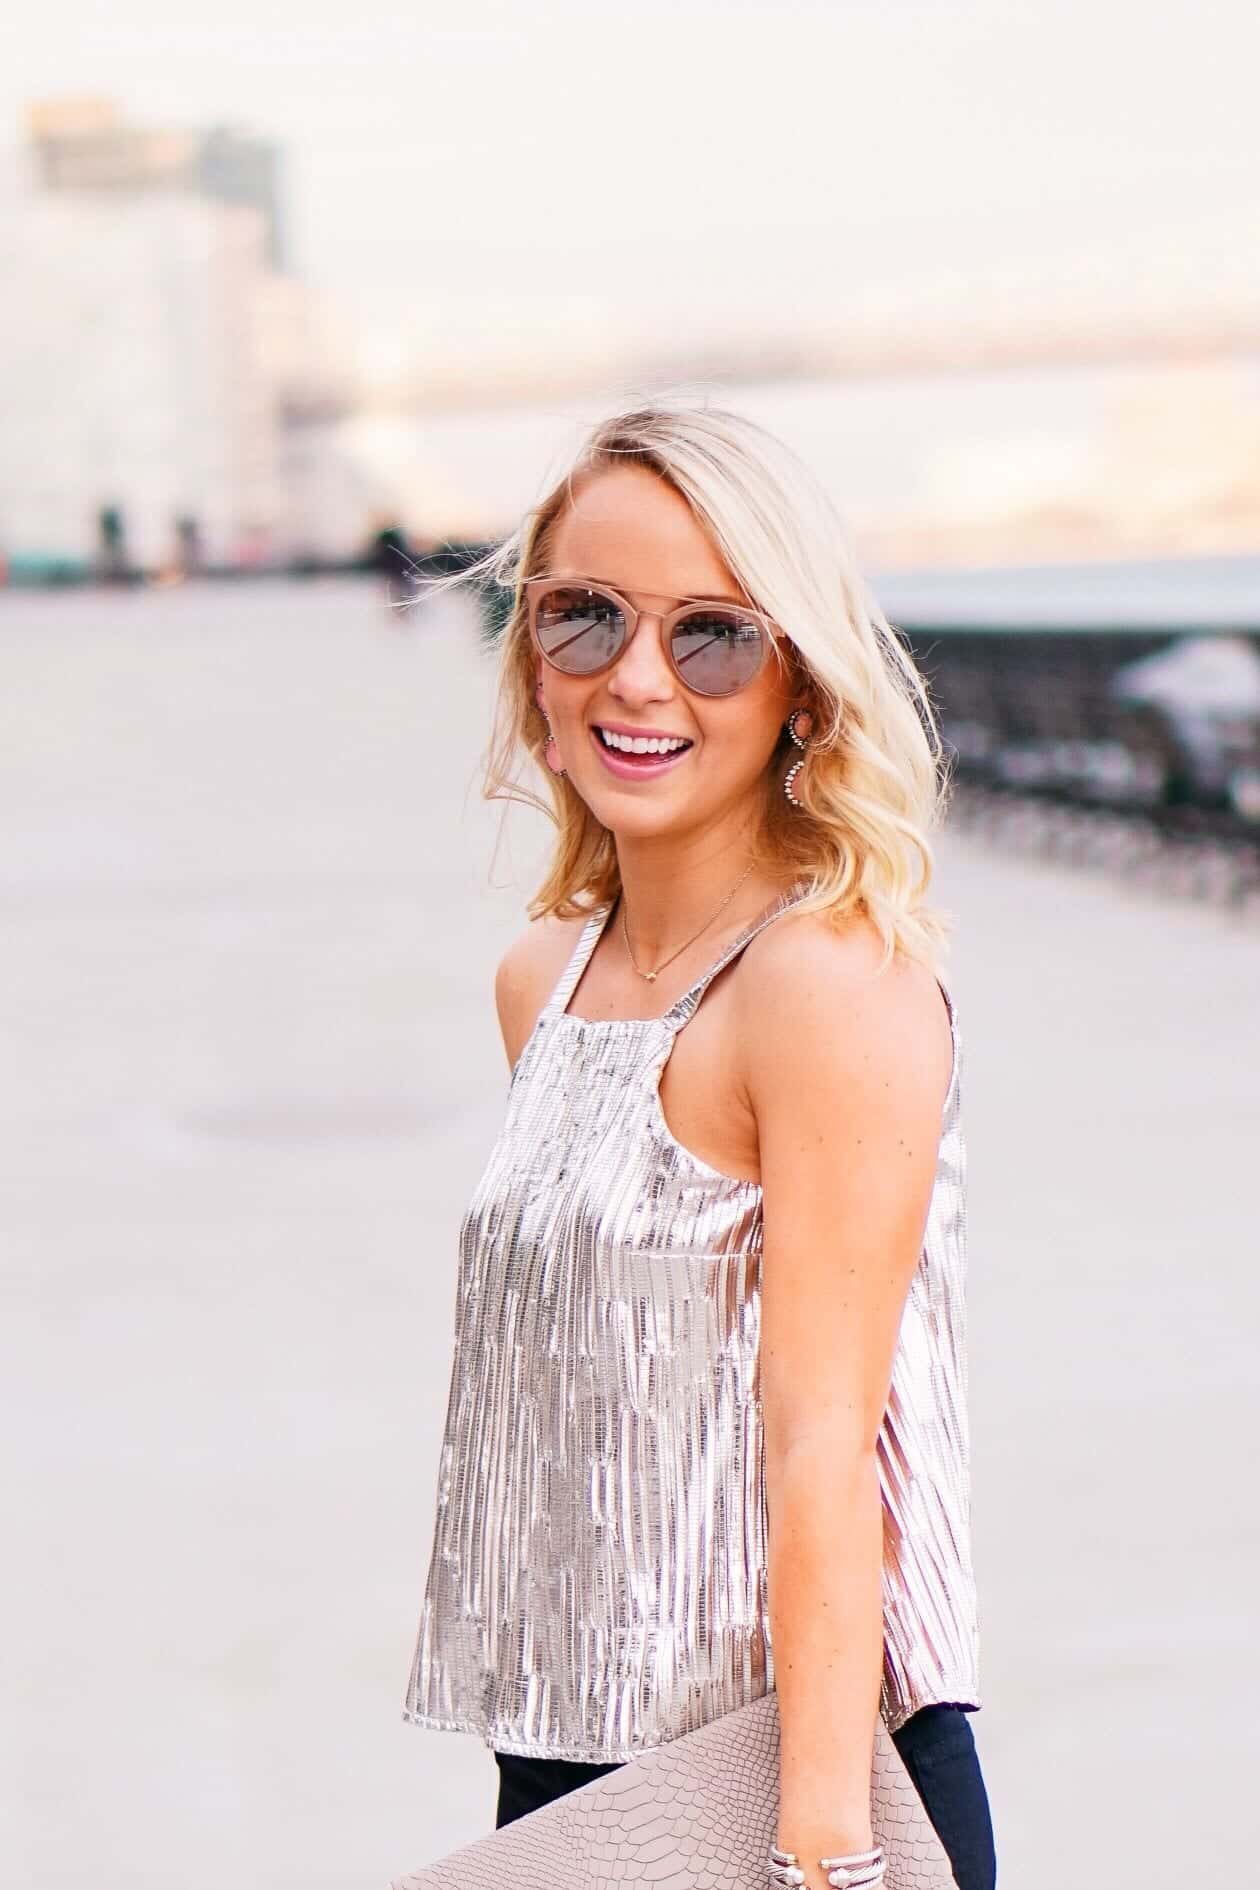 31 Best Ideas on How To Wear Metallic Outfits For Girls